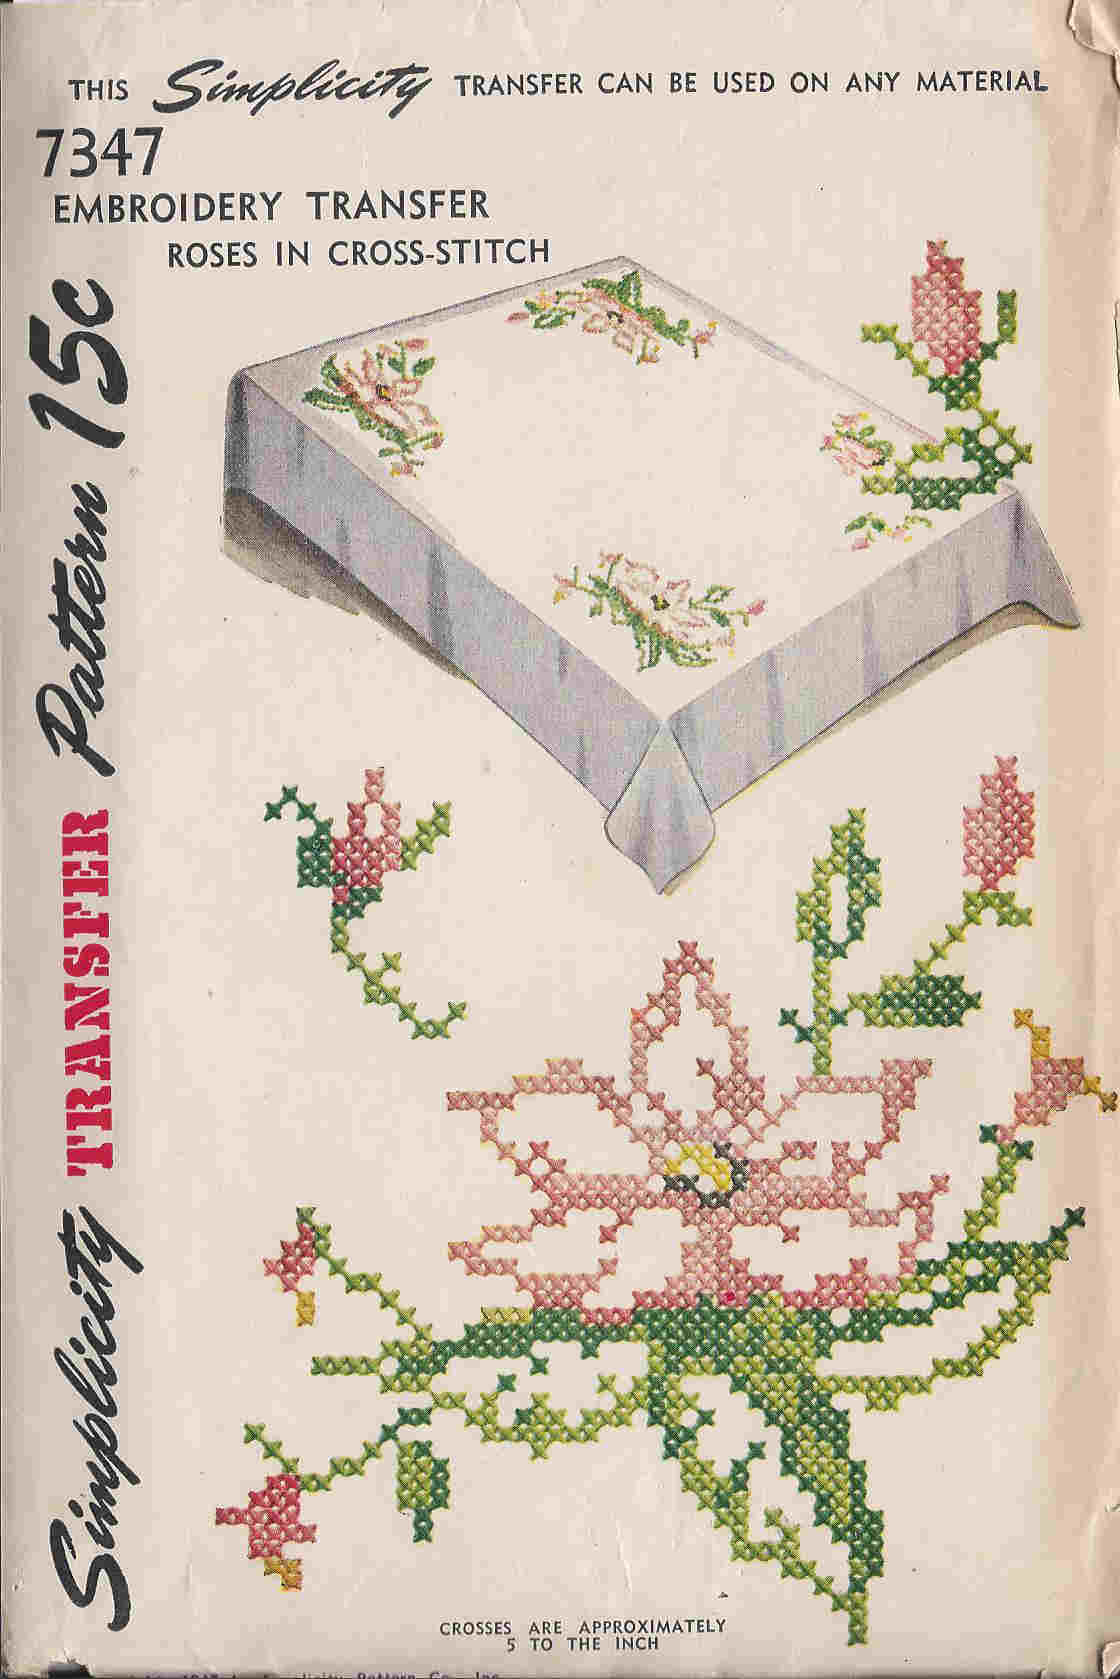 Transfer Patterns For Hand Embroidery Dellajane Sewing Patterns Aunt Martha Transfer And Embroidery Patterns